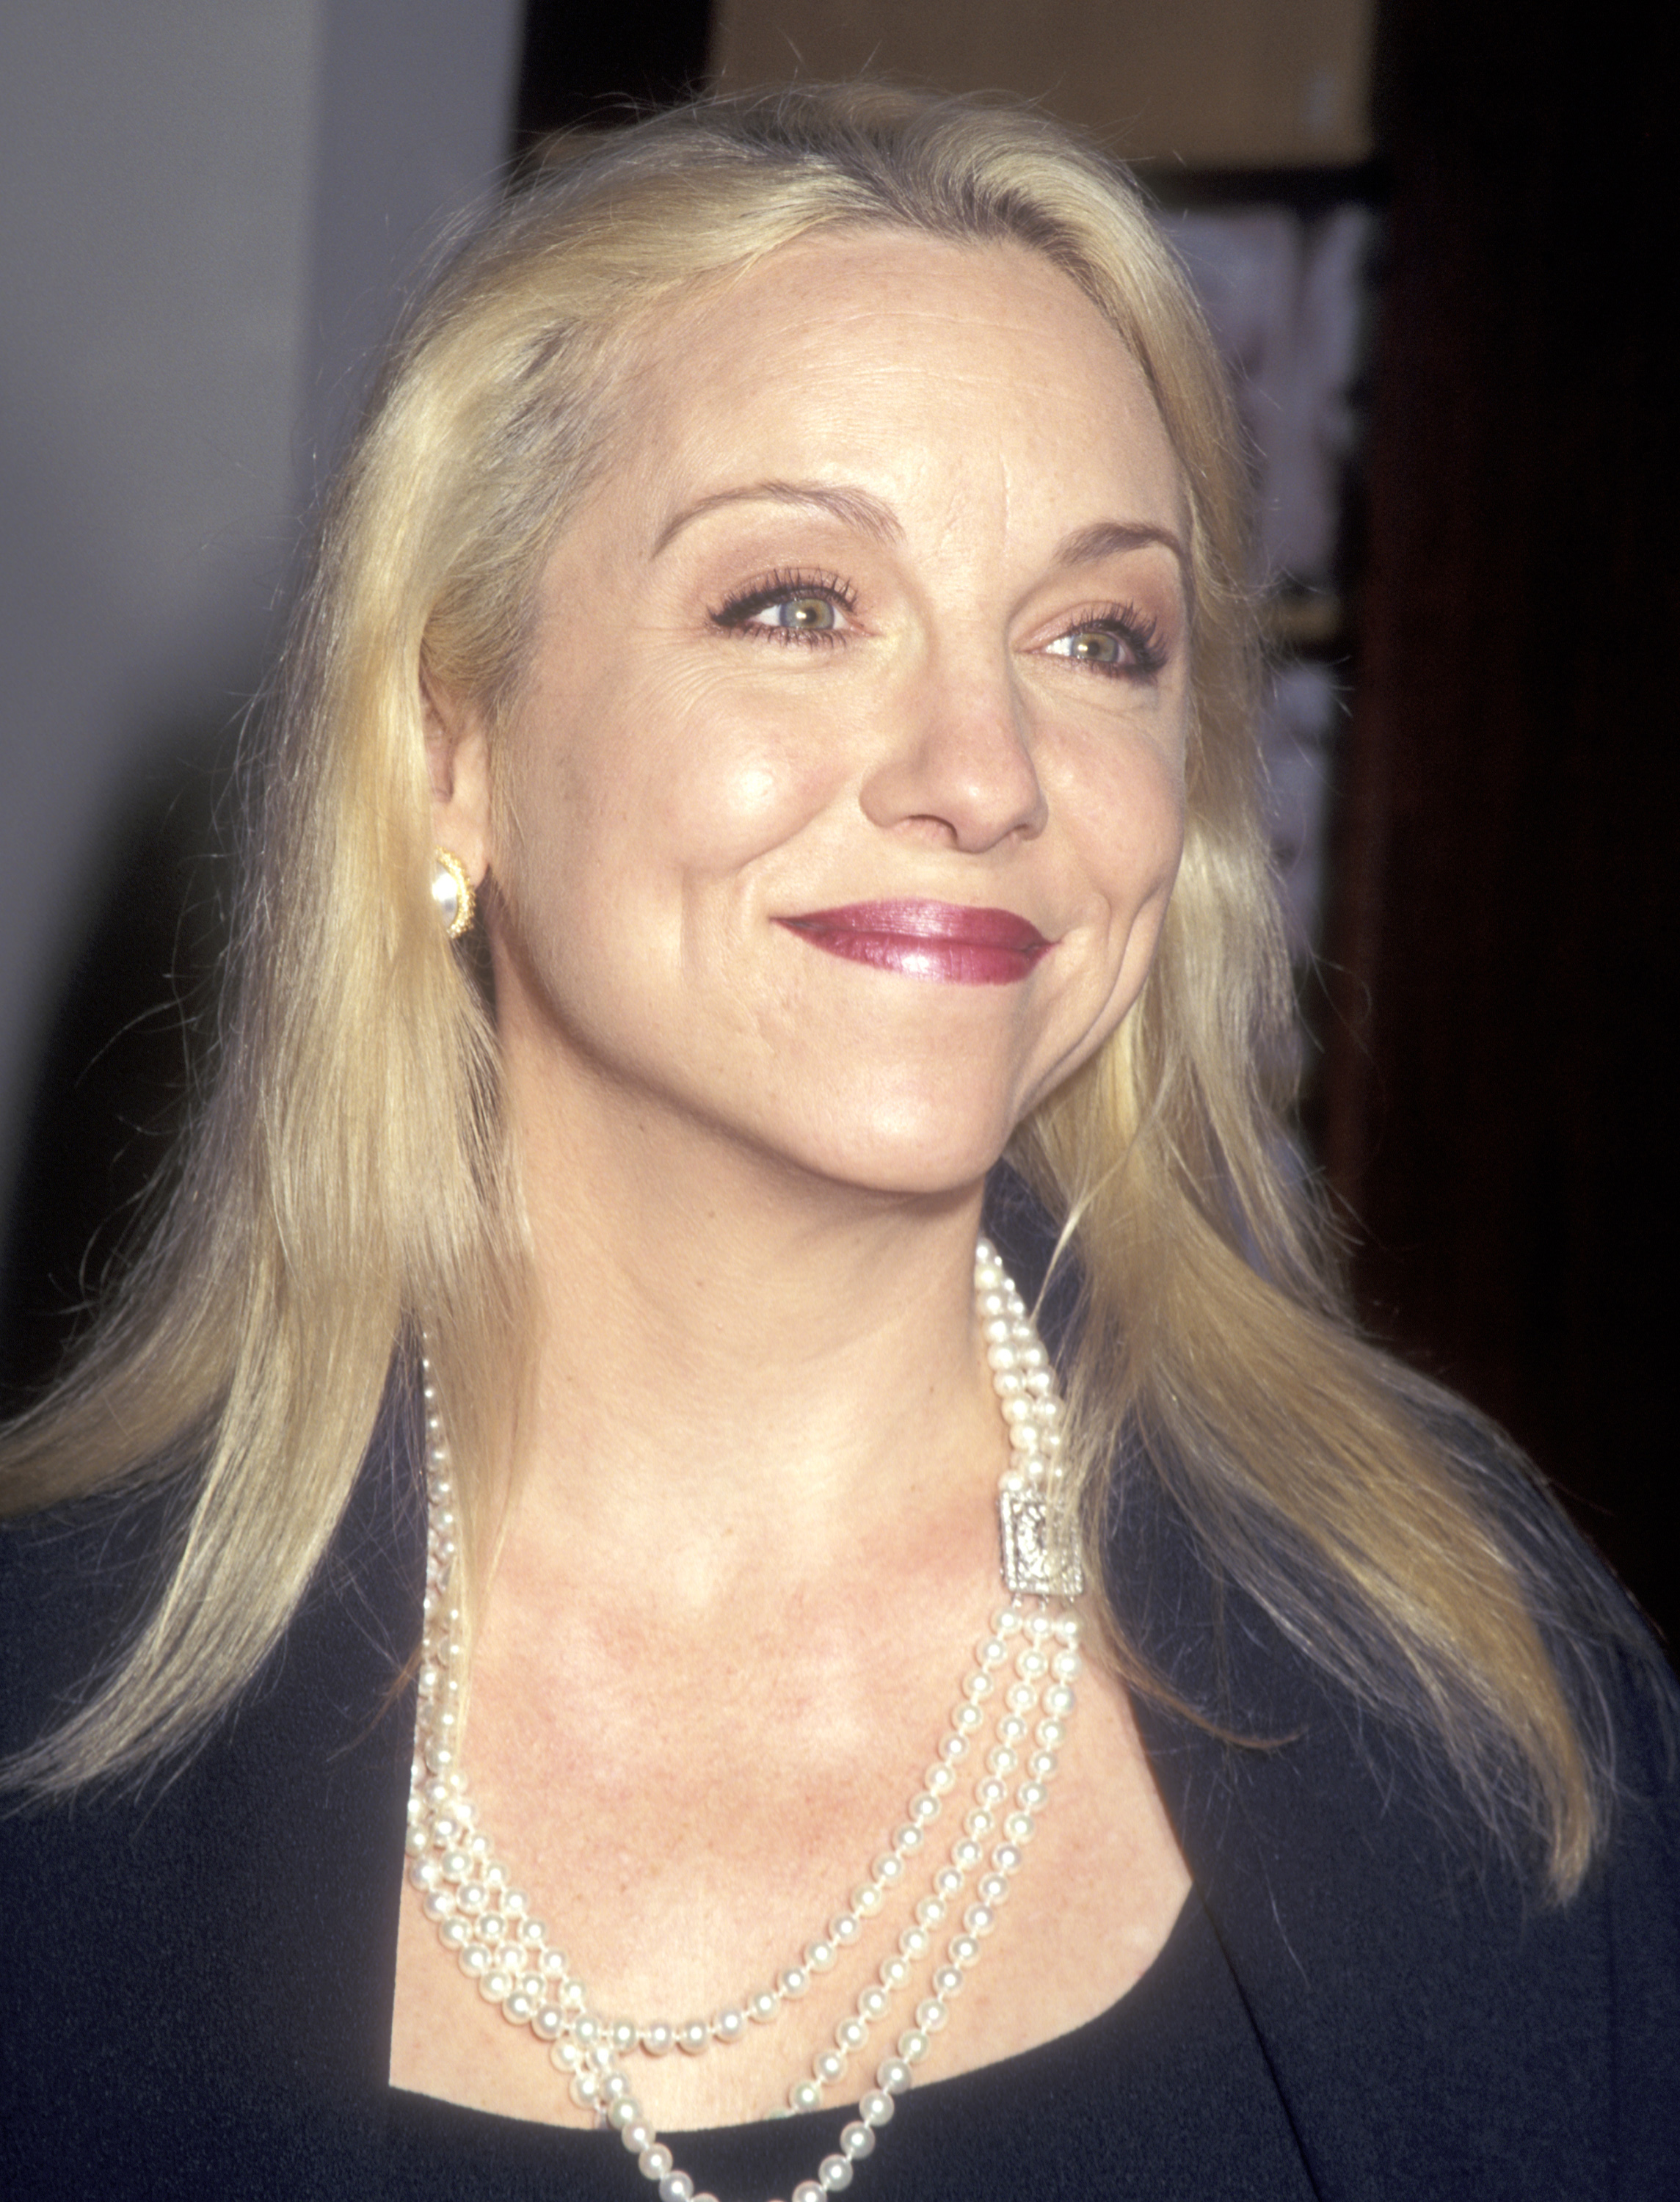 Brett Butler during the signing the book signing of "Knee Deep in Paradise" on April 22, 1996, at Barnes and Noble Bookstore in New York City | Source: Getty Images